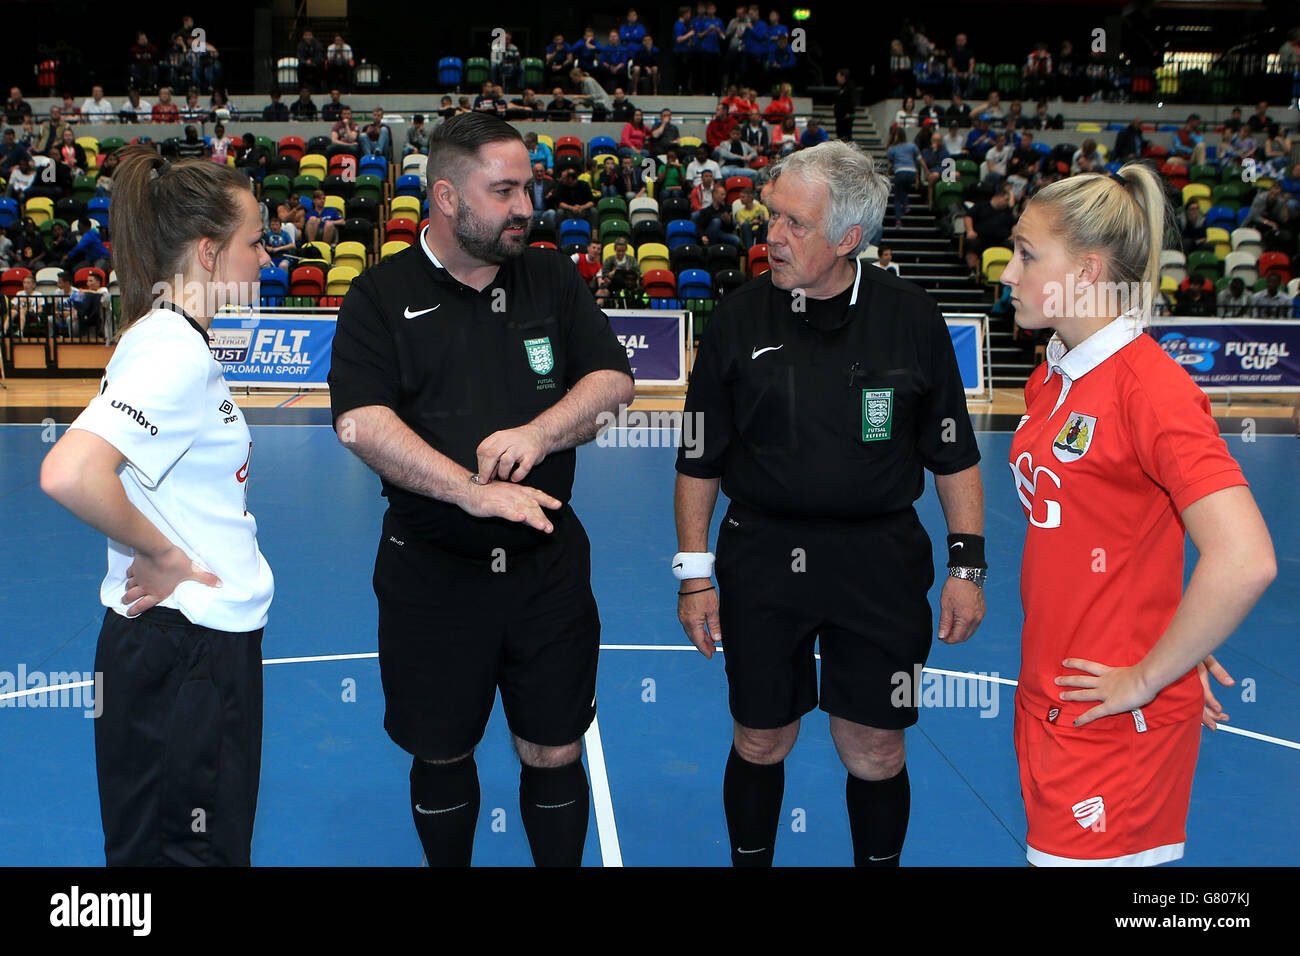 Soccer AM Futsal Cup - Finals - Copper Box Arena. The Derby County captain and the Bristol City captain with the officials for the coin toss prior to the Futsal Ladies Challenge Stock Photo